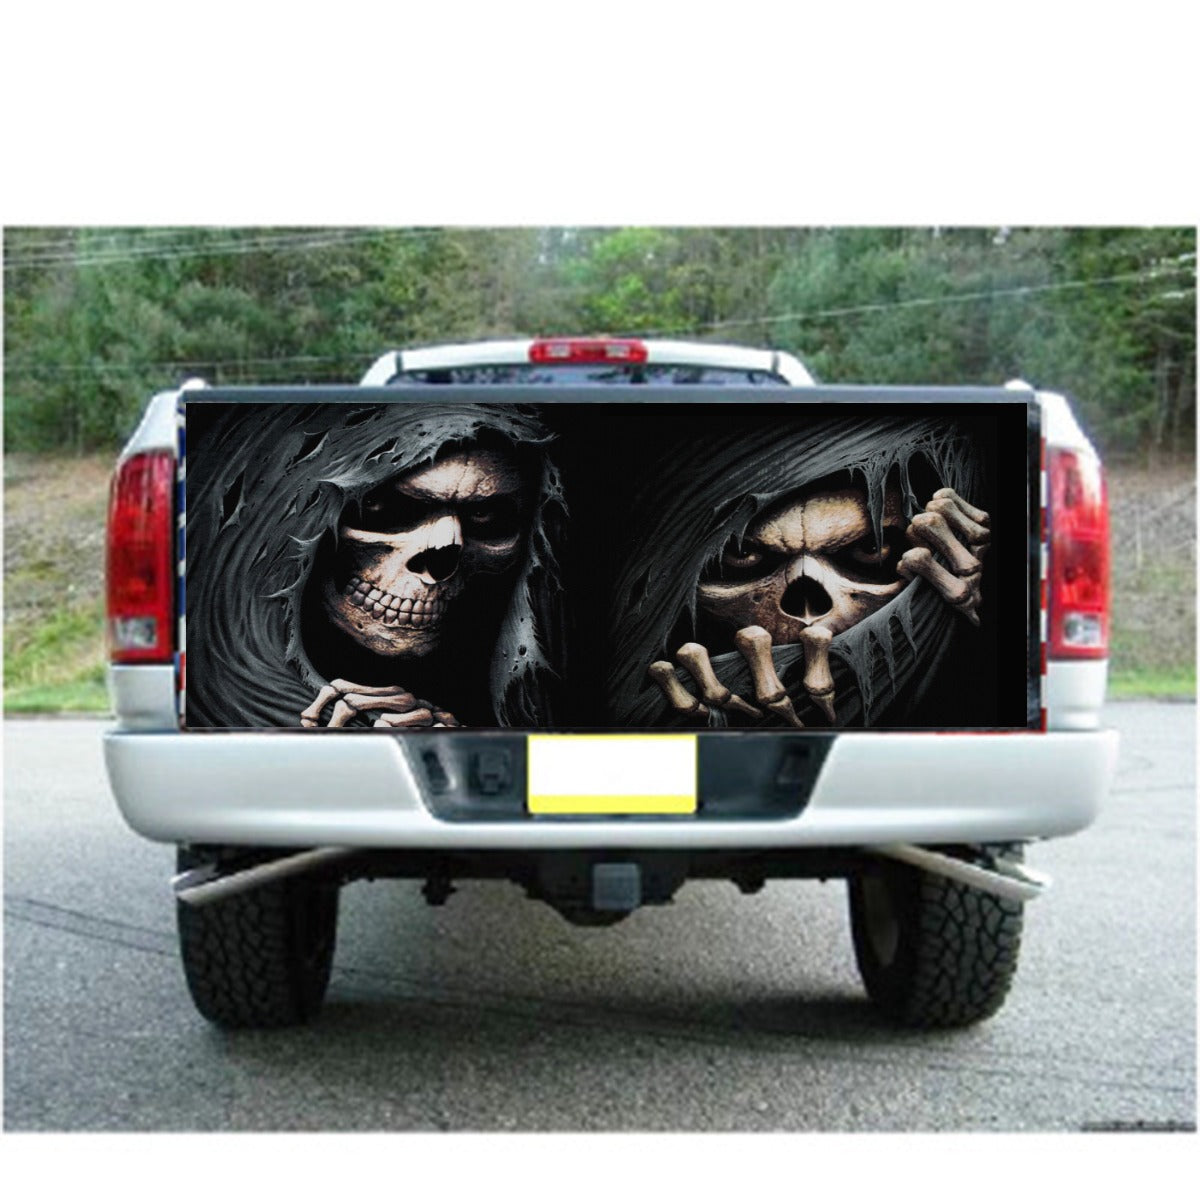 Grim reaper skeleton gothic Truck Bed Decal